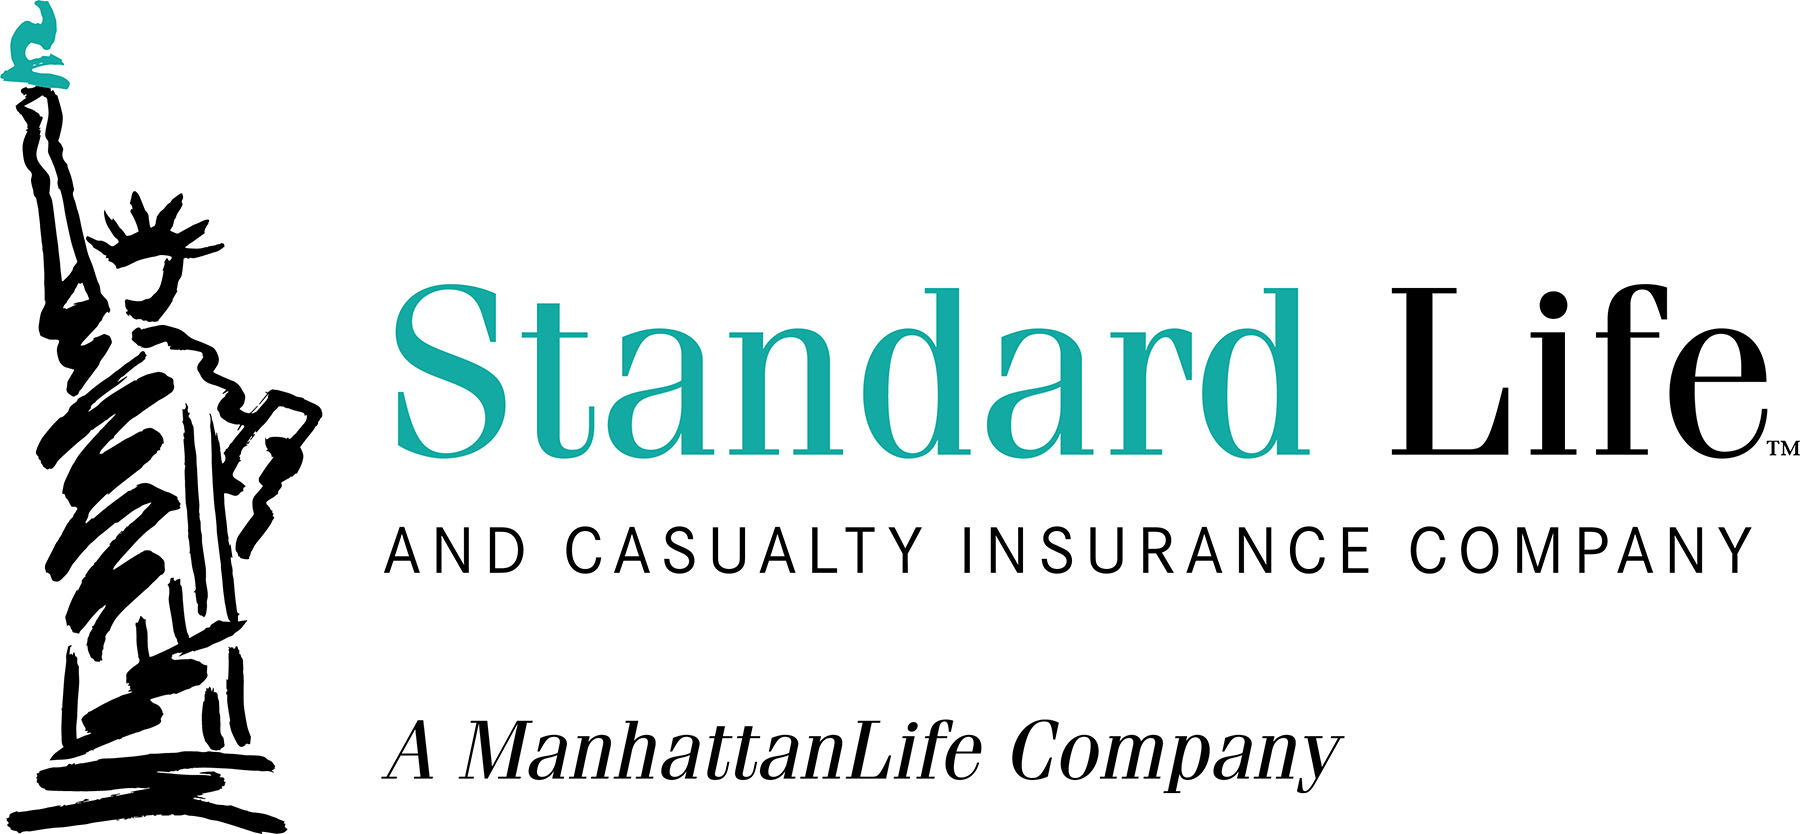 Standard Life and Casualty Insurance Company Logo